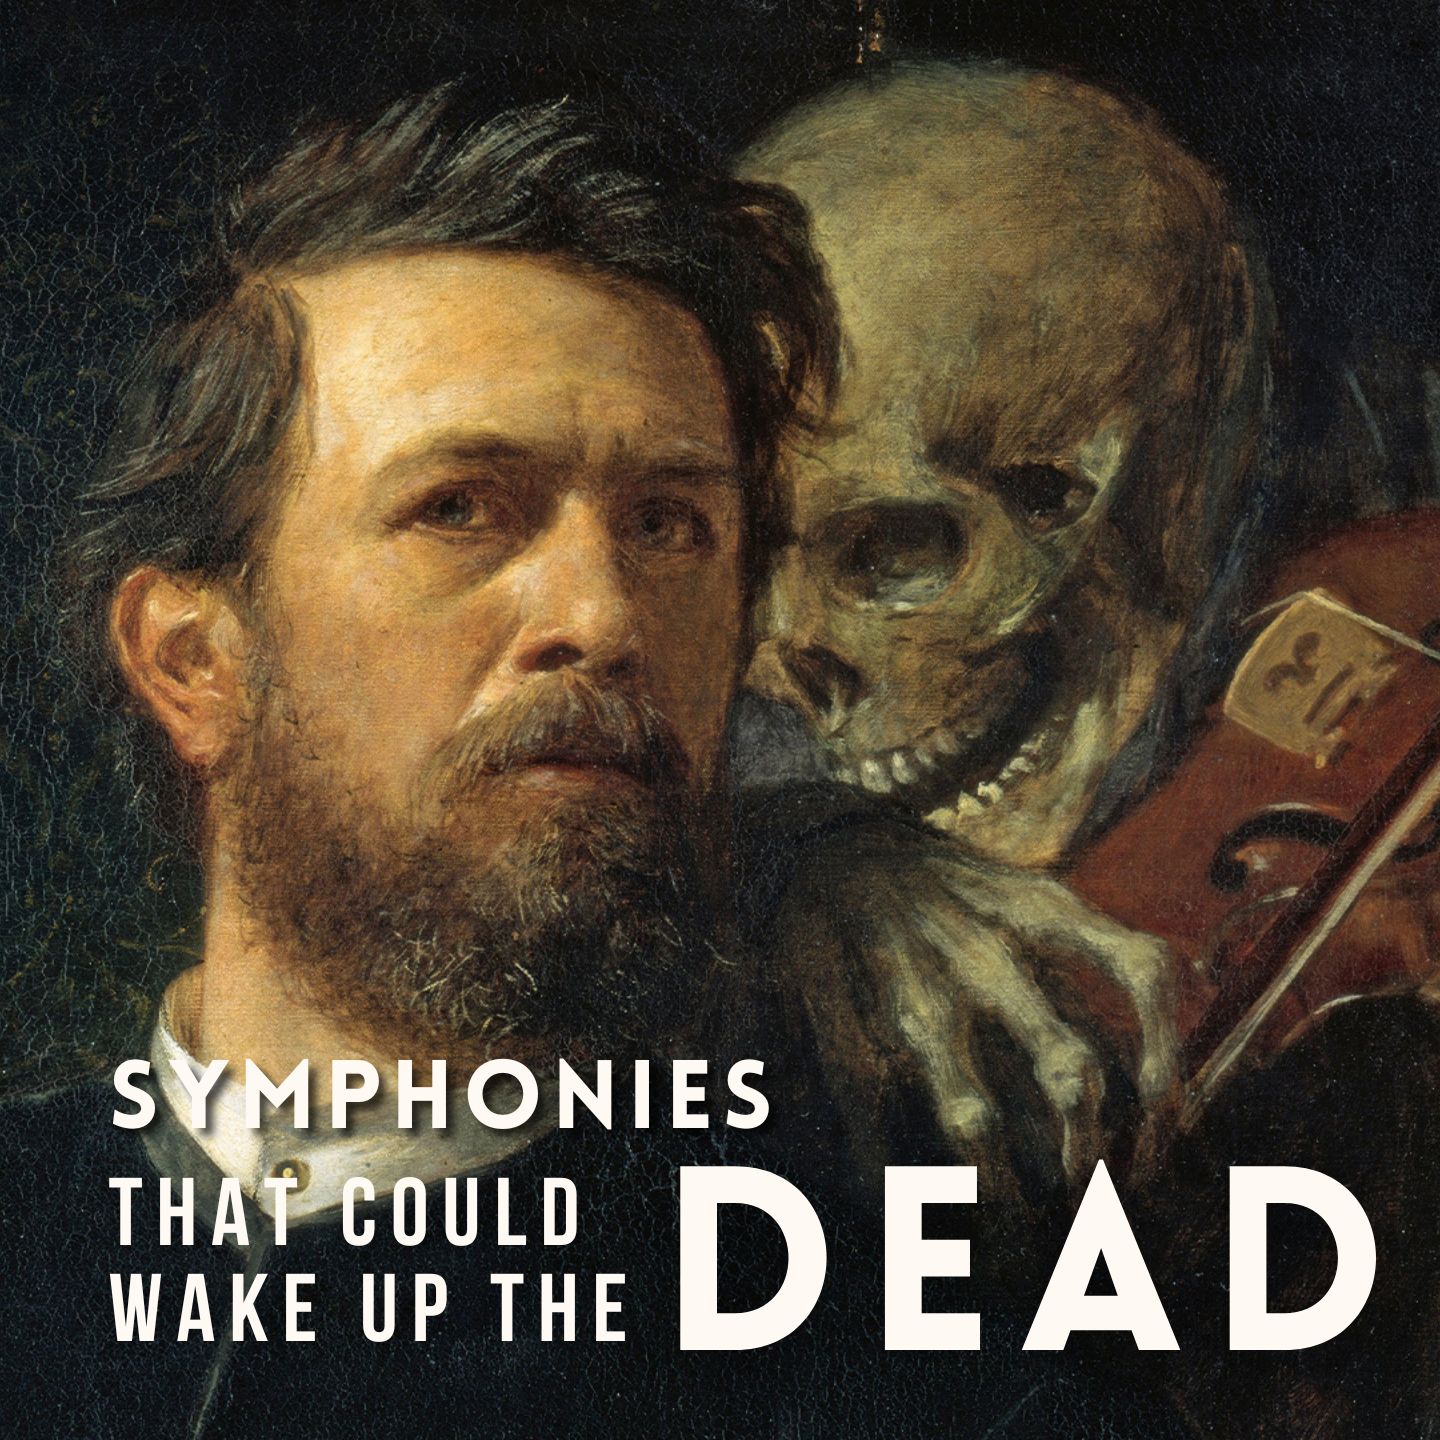 Symphonies That Could Wake Up the Dead